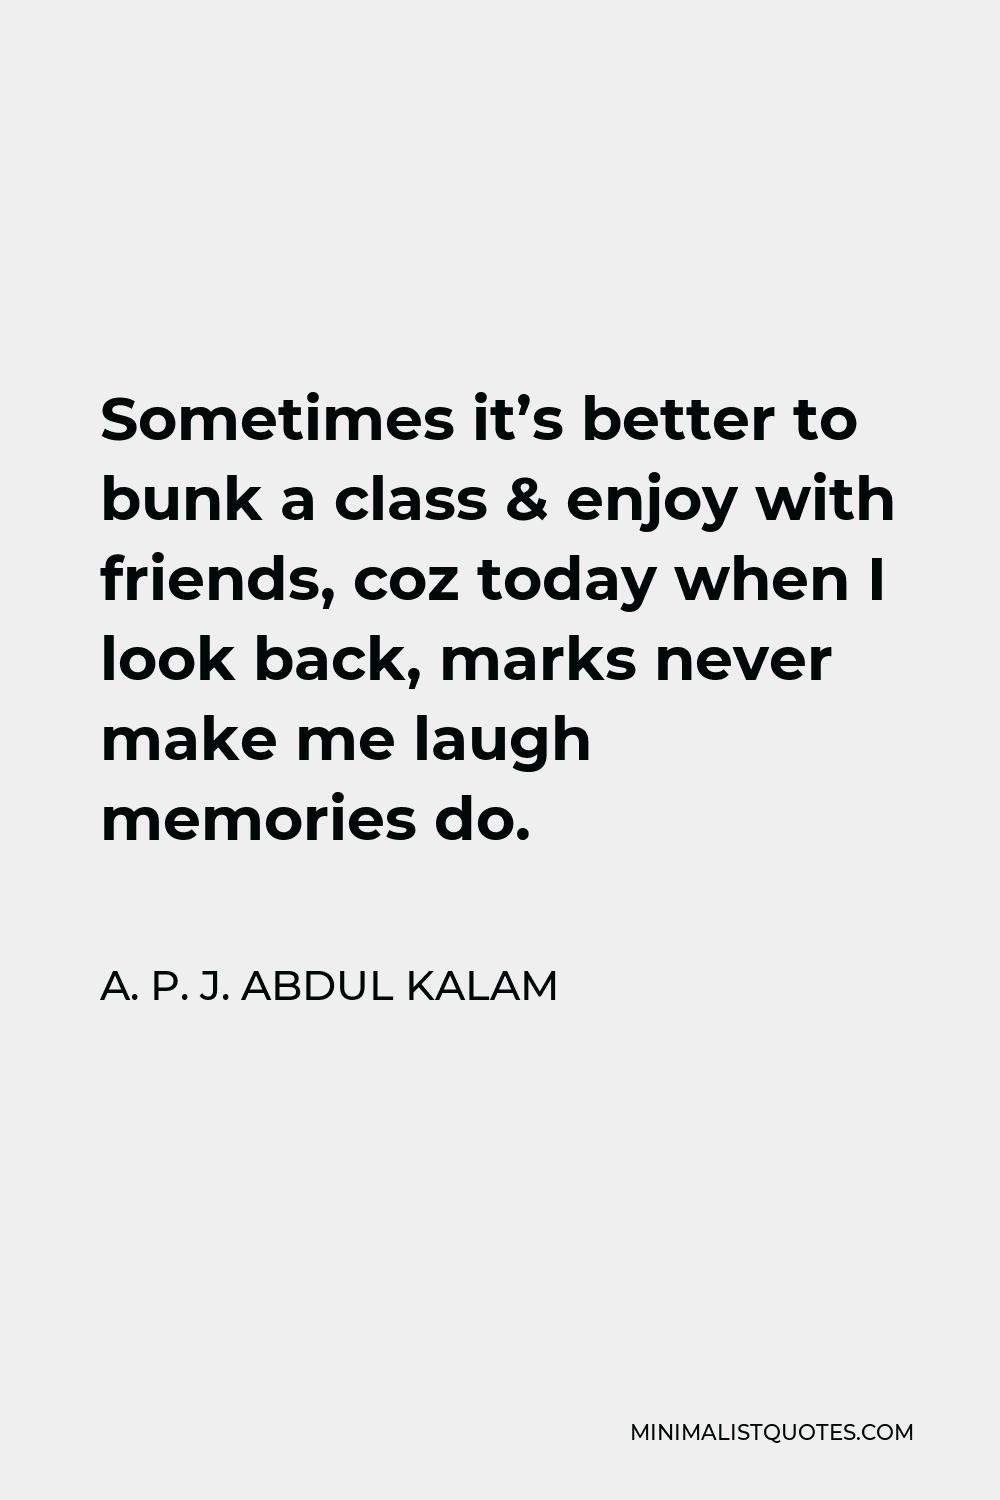 A. P. J. Abdul Kalam Quote - Sometimes it’s better to bunk a class & enjoy with friends, coz today when I look back, marks never make me laugh memories do.